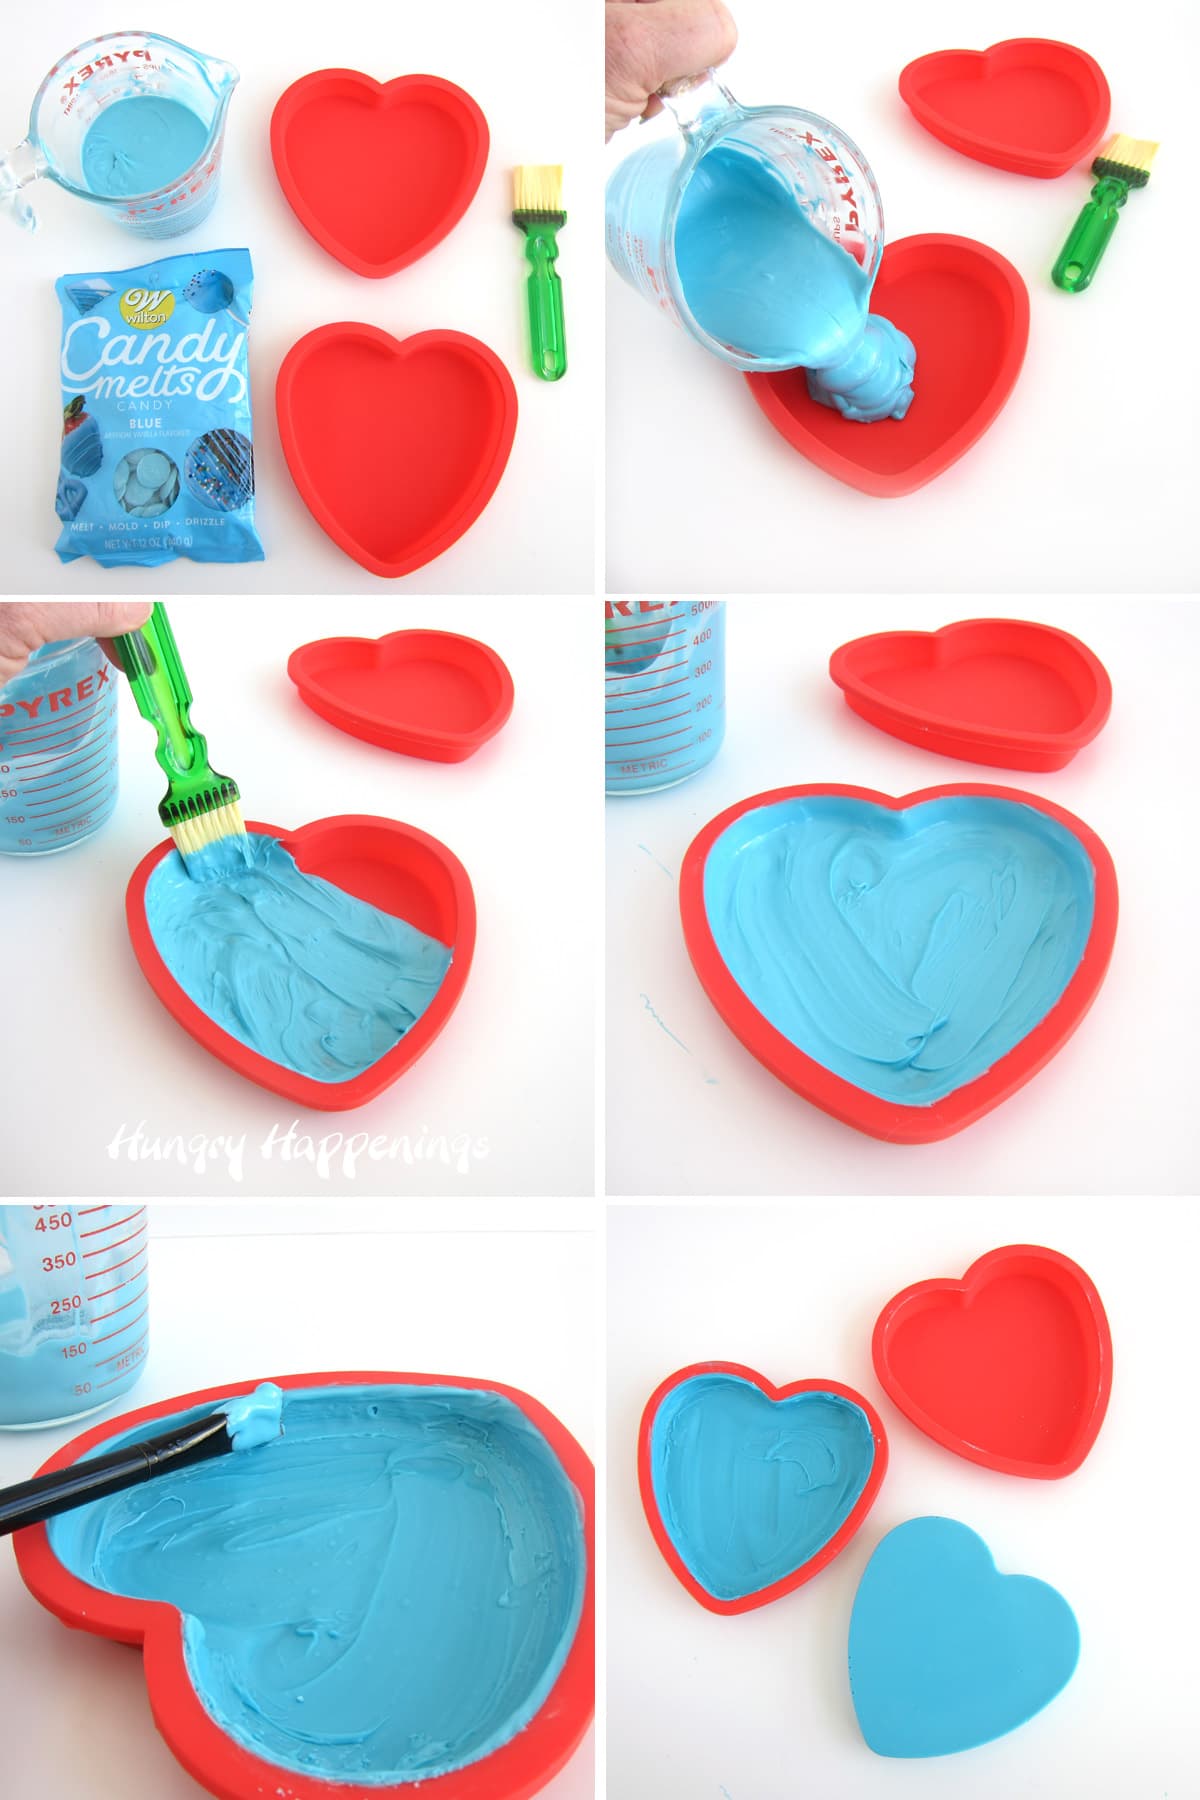 pour melted blue candy melts into silicone heart mold brushing it over the surface and up the sides